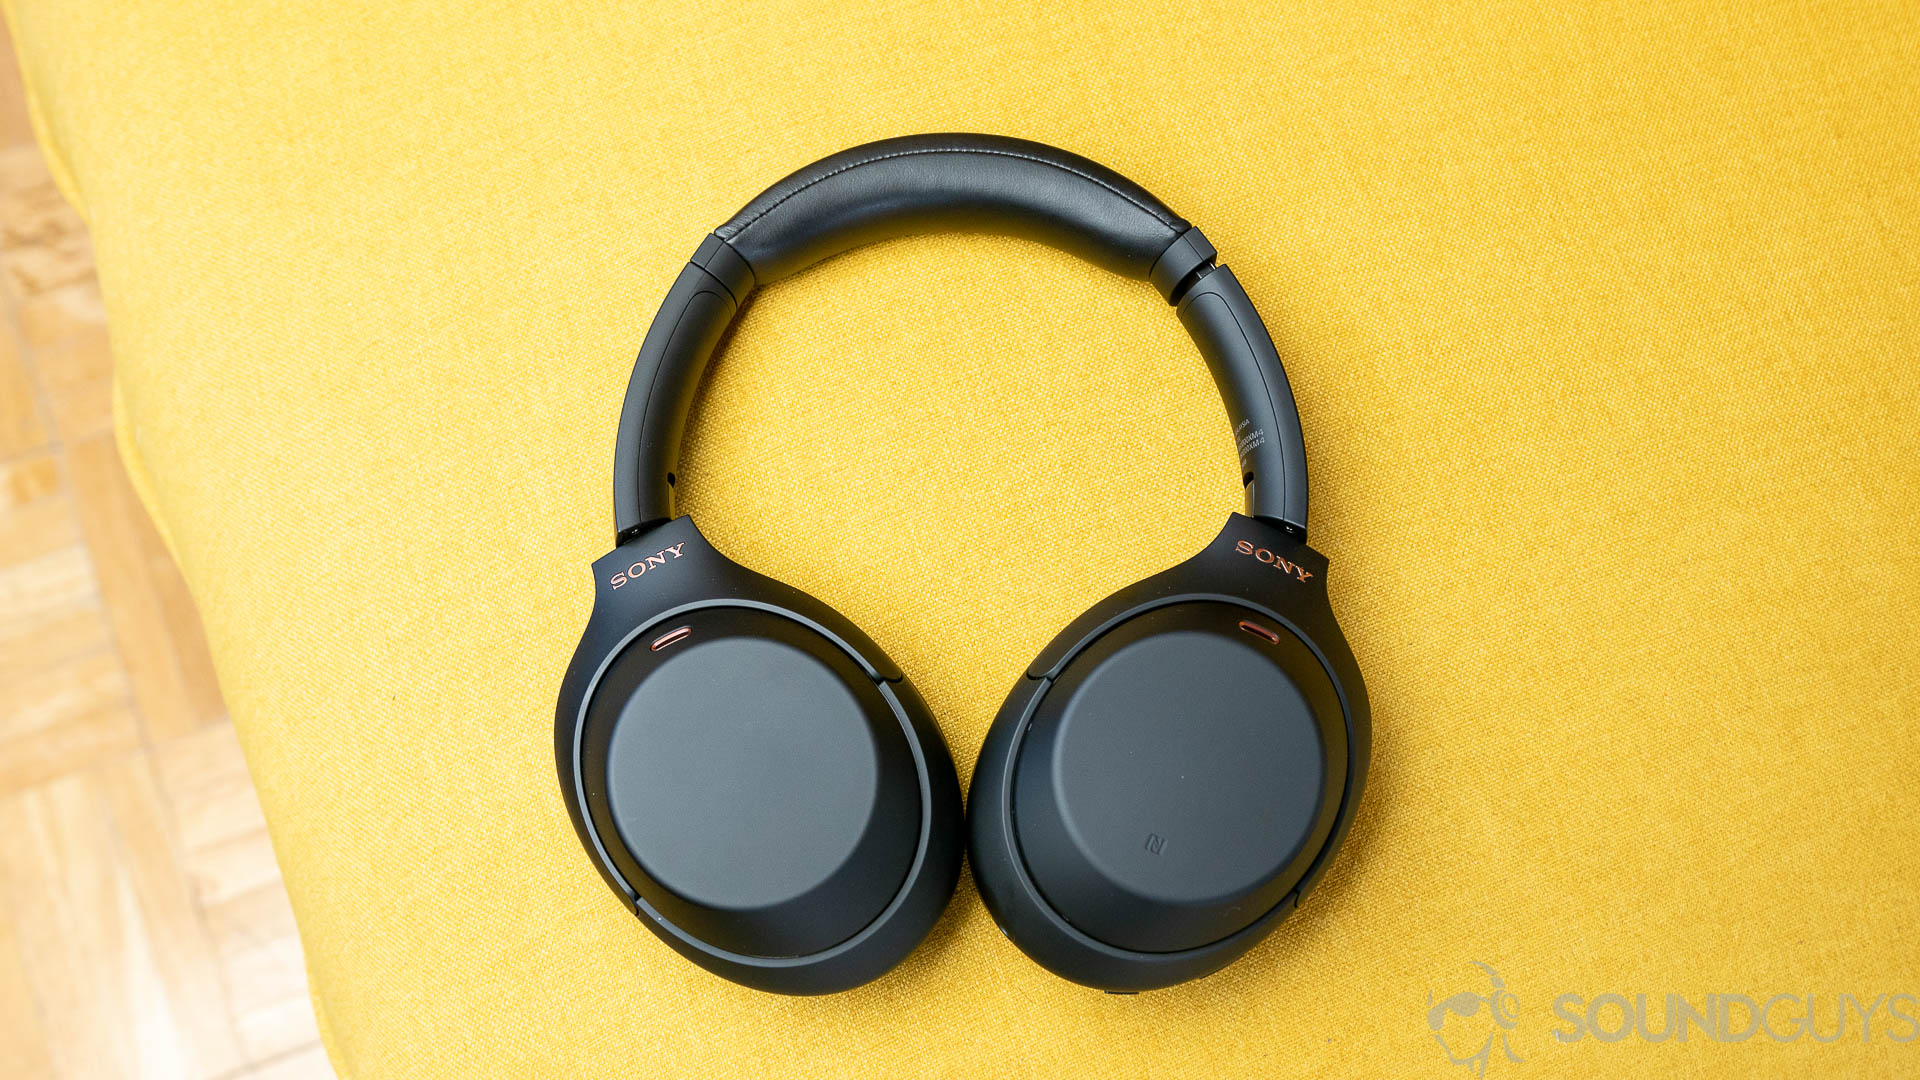 Sony WH-1000XM4 noise canceling headphones against a completely yellow background.